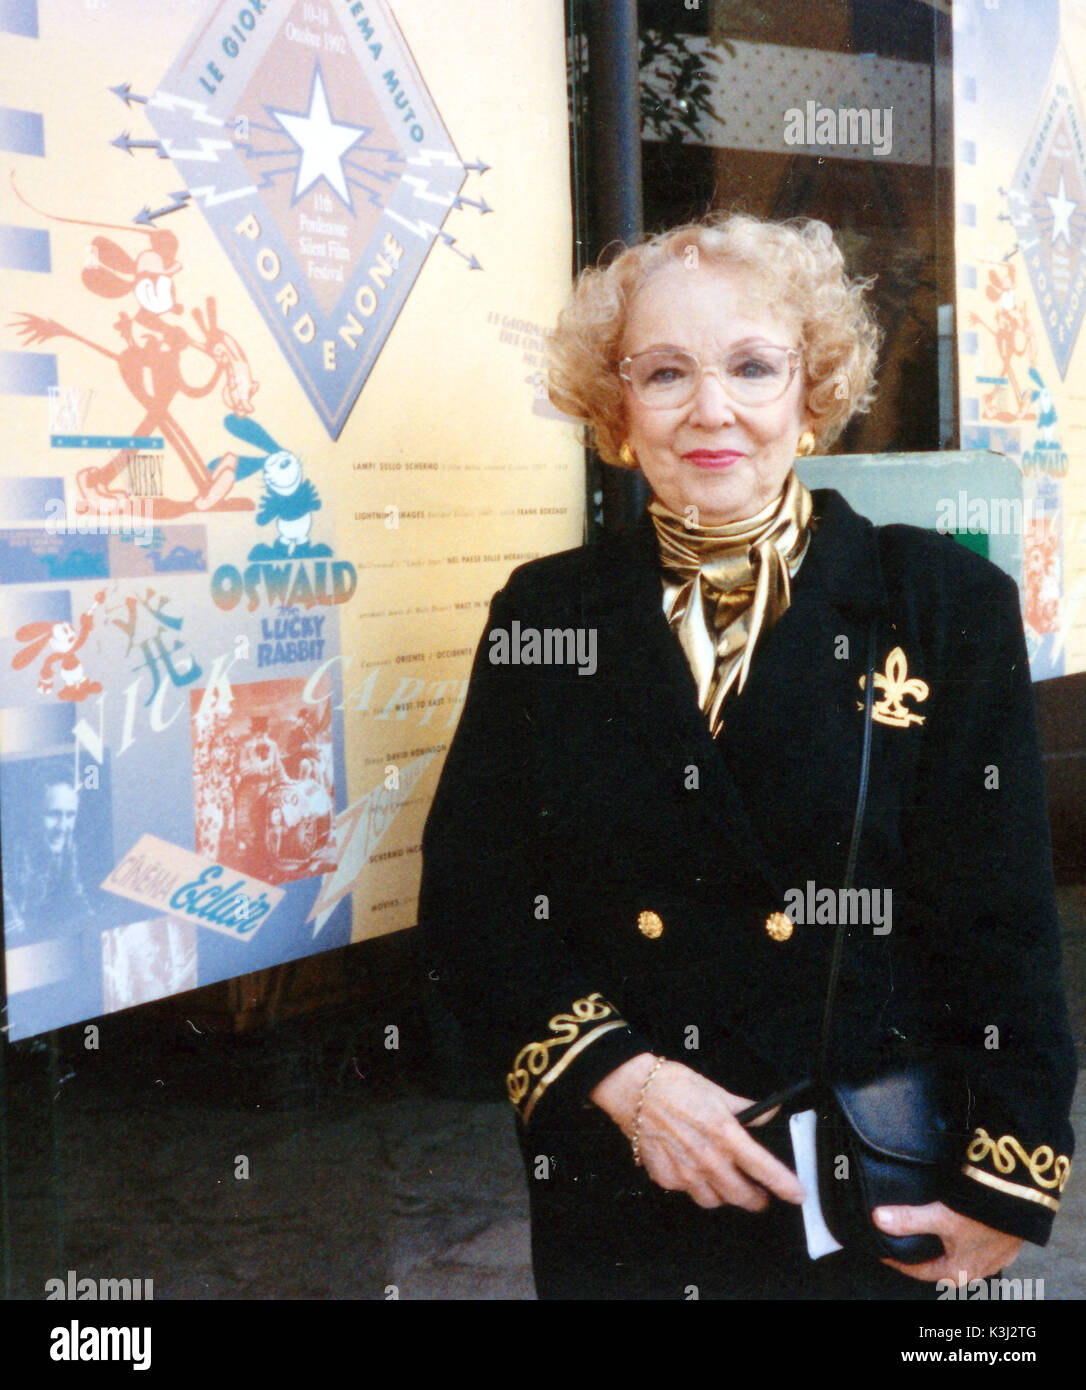 VIRGINIA DAVIS who was 'Alice' at one point in a long-running series by Walt Disney in which Alice interacted with animated cartoon characters. Seen here in 1992 at Le Giornate Del Cinema Muto, the 11th annual silent film festival at Pordenone in Northern Italy, which screened a group of Alice films Stock Photo